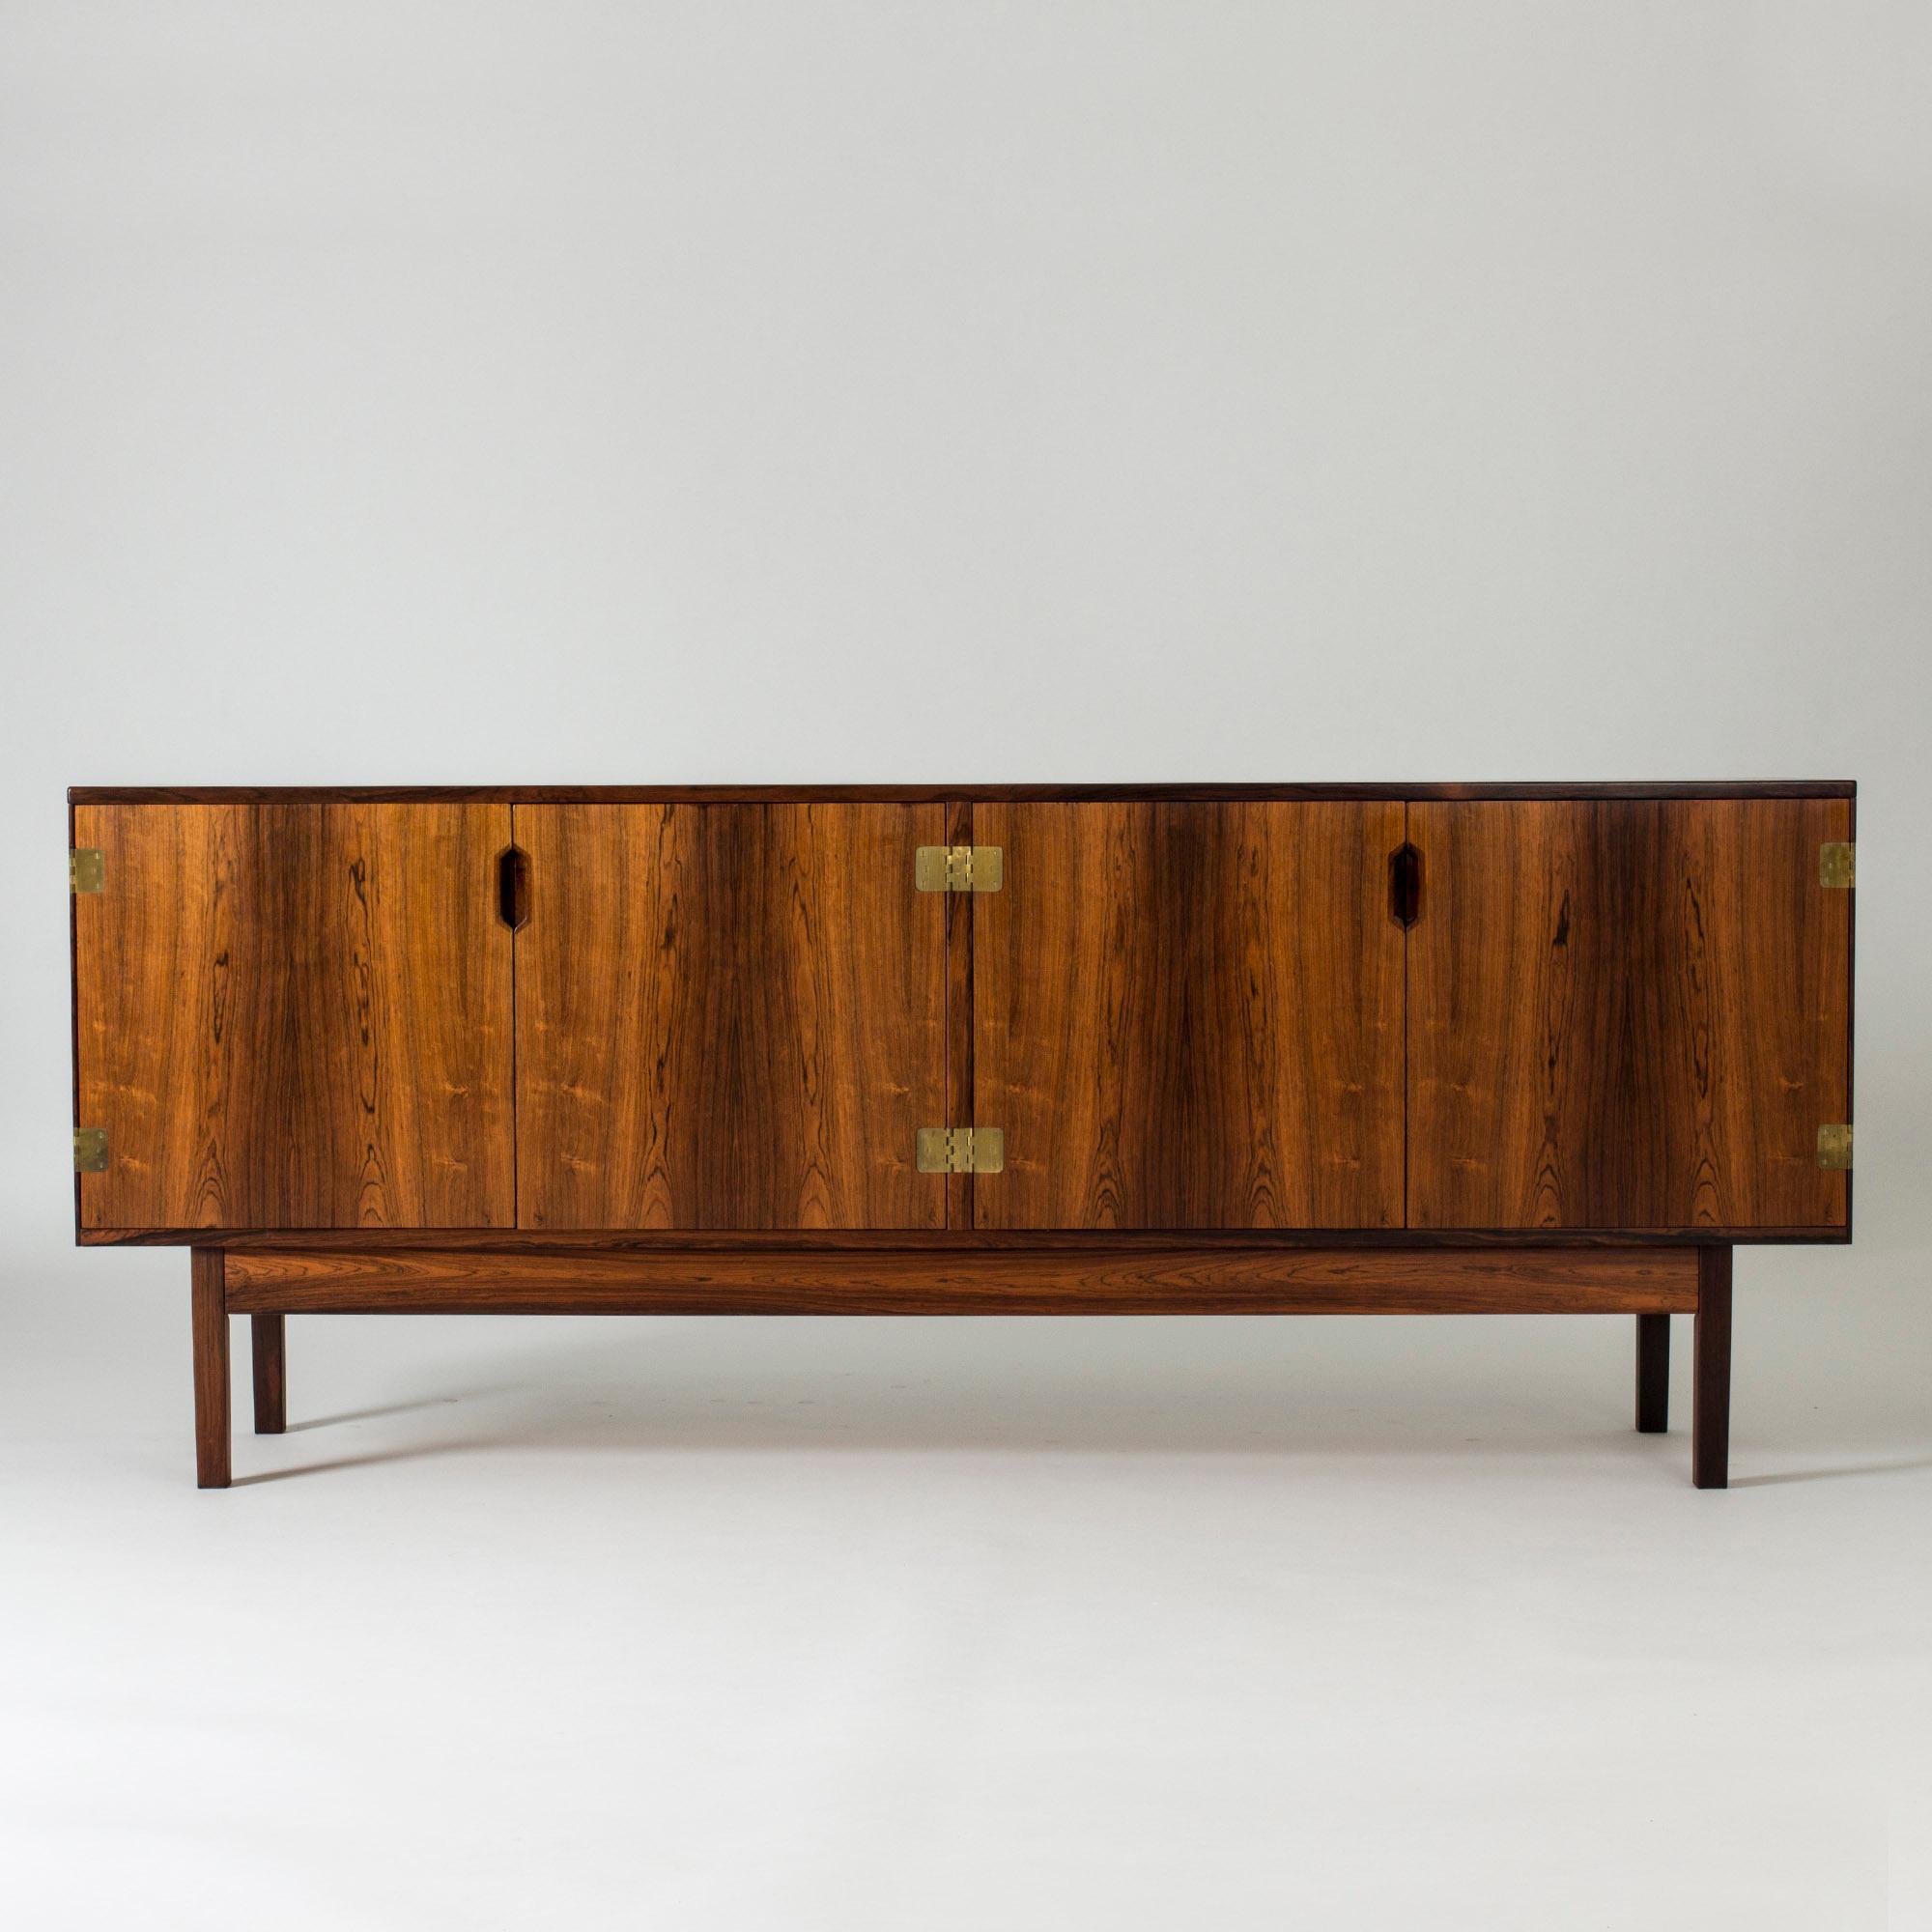 Beautiful rosewood sideboard by Svend Langkilde. Elegantly sculpted handles, large decorative brass hinges on the sides and in the center of the front.